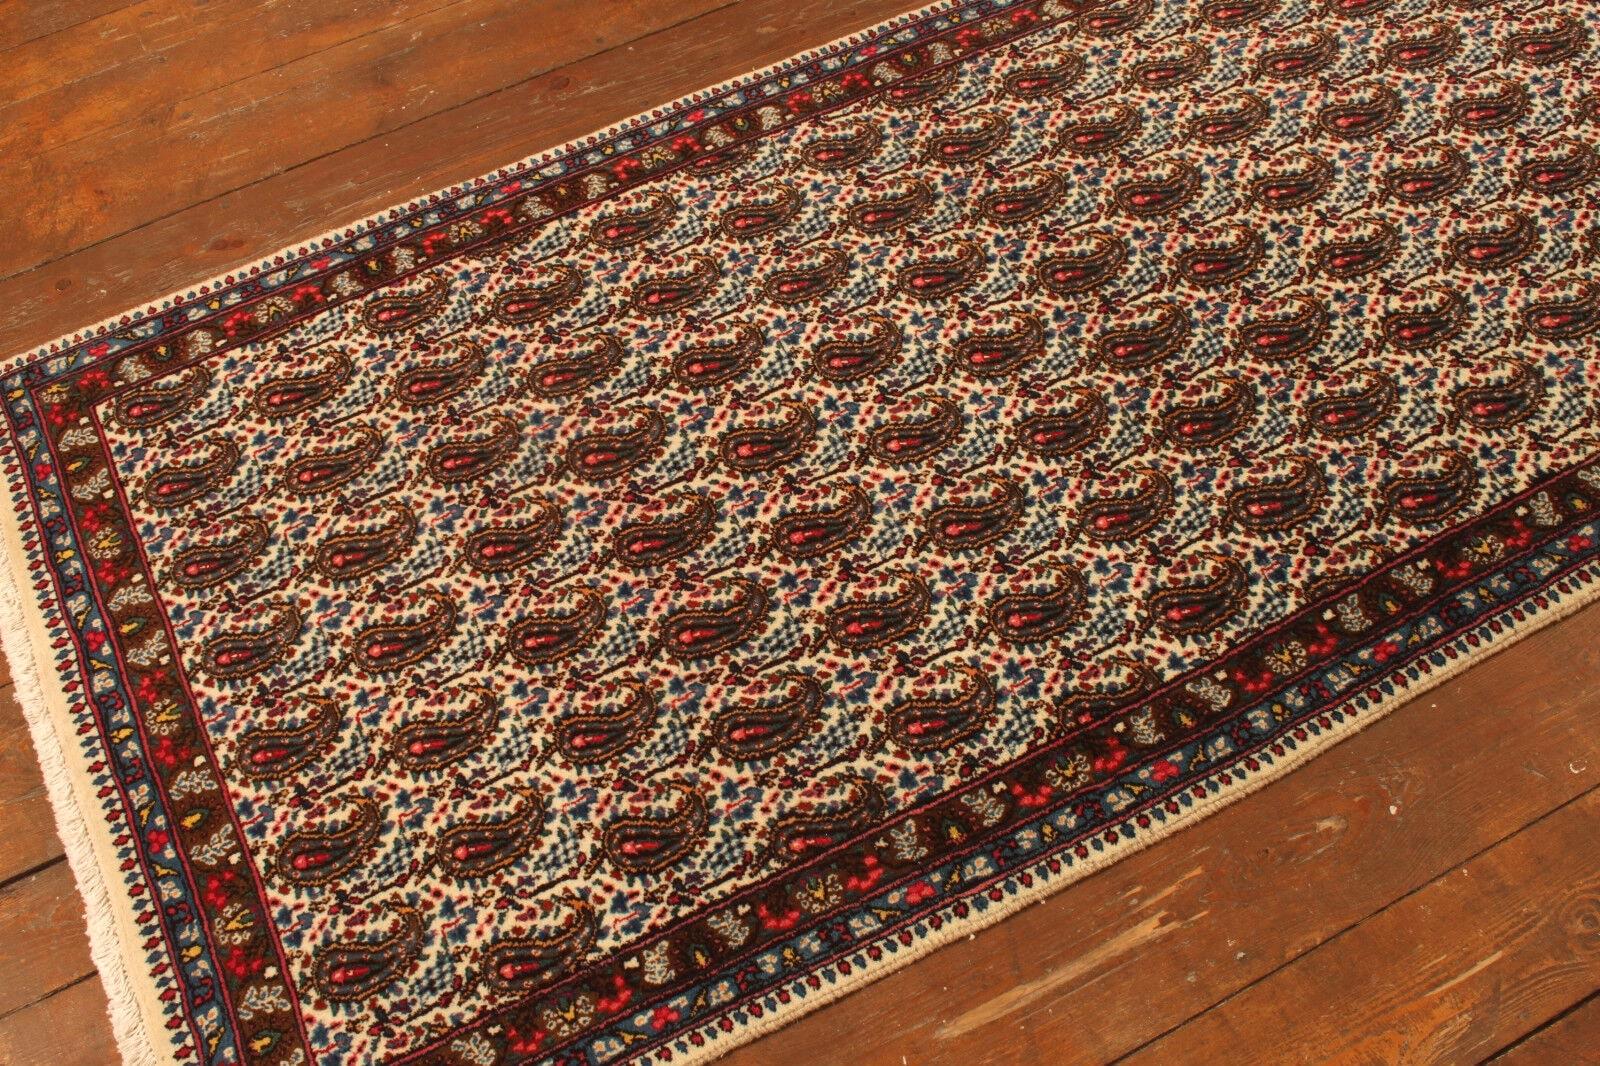 Late 20th Century Handmade Vintage Persian Style Senneh Runner Rug 3.4' x 10.1', 1970s - 1T43 For Sale